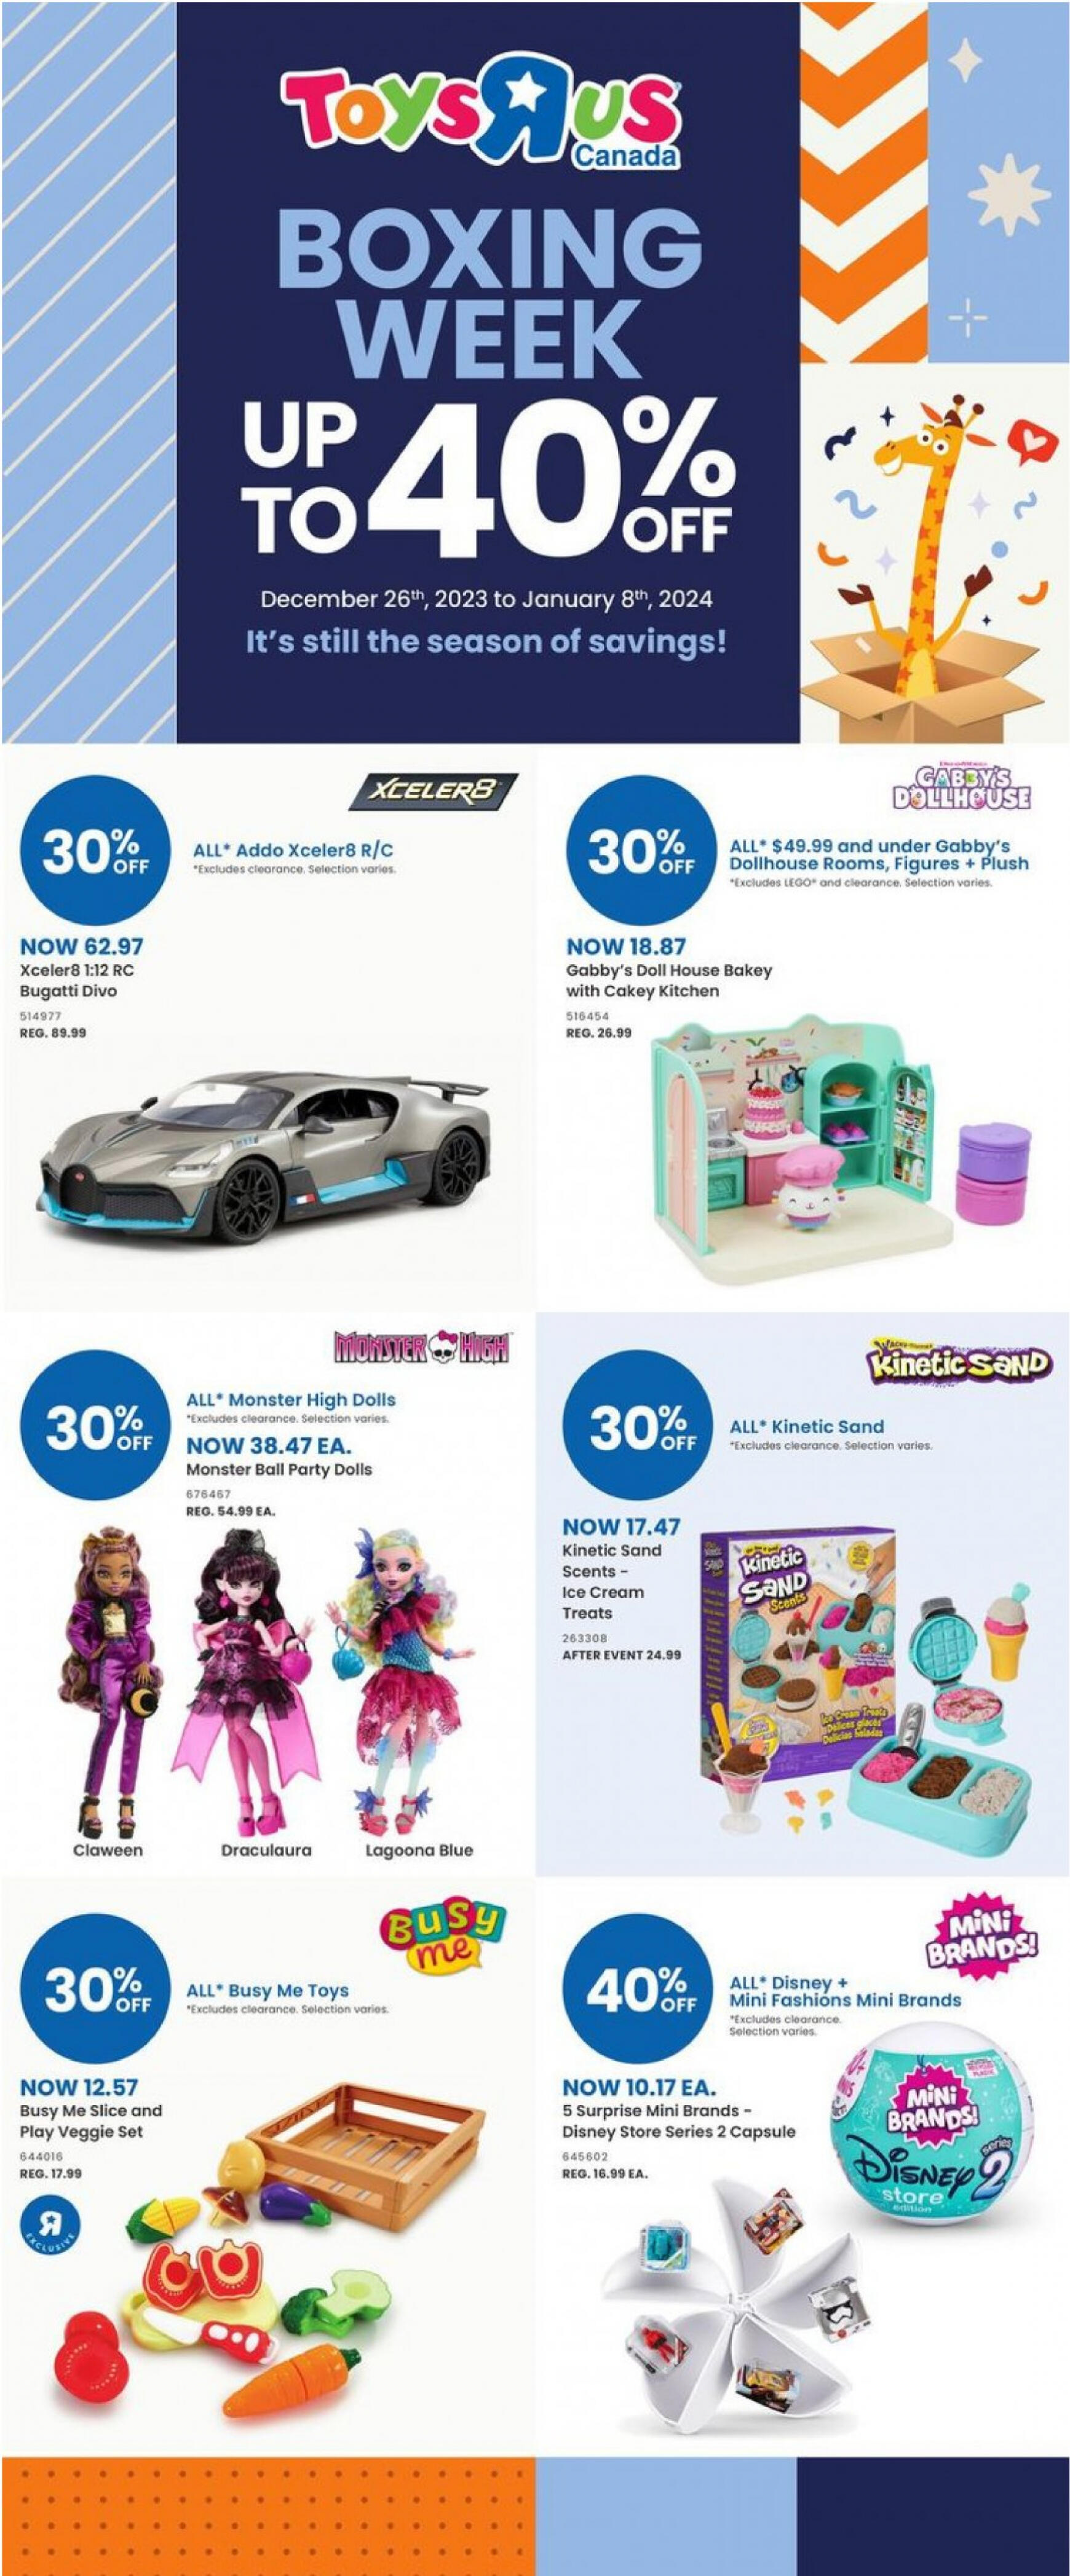 toys-r-us - Toys"R"Us valid from 26.12.2023